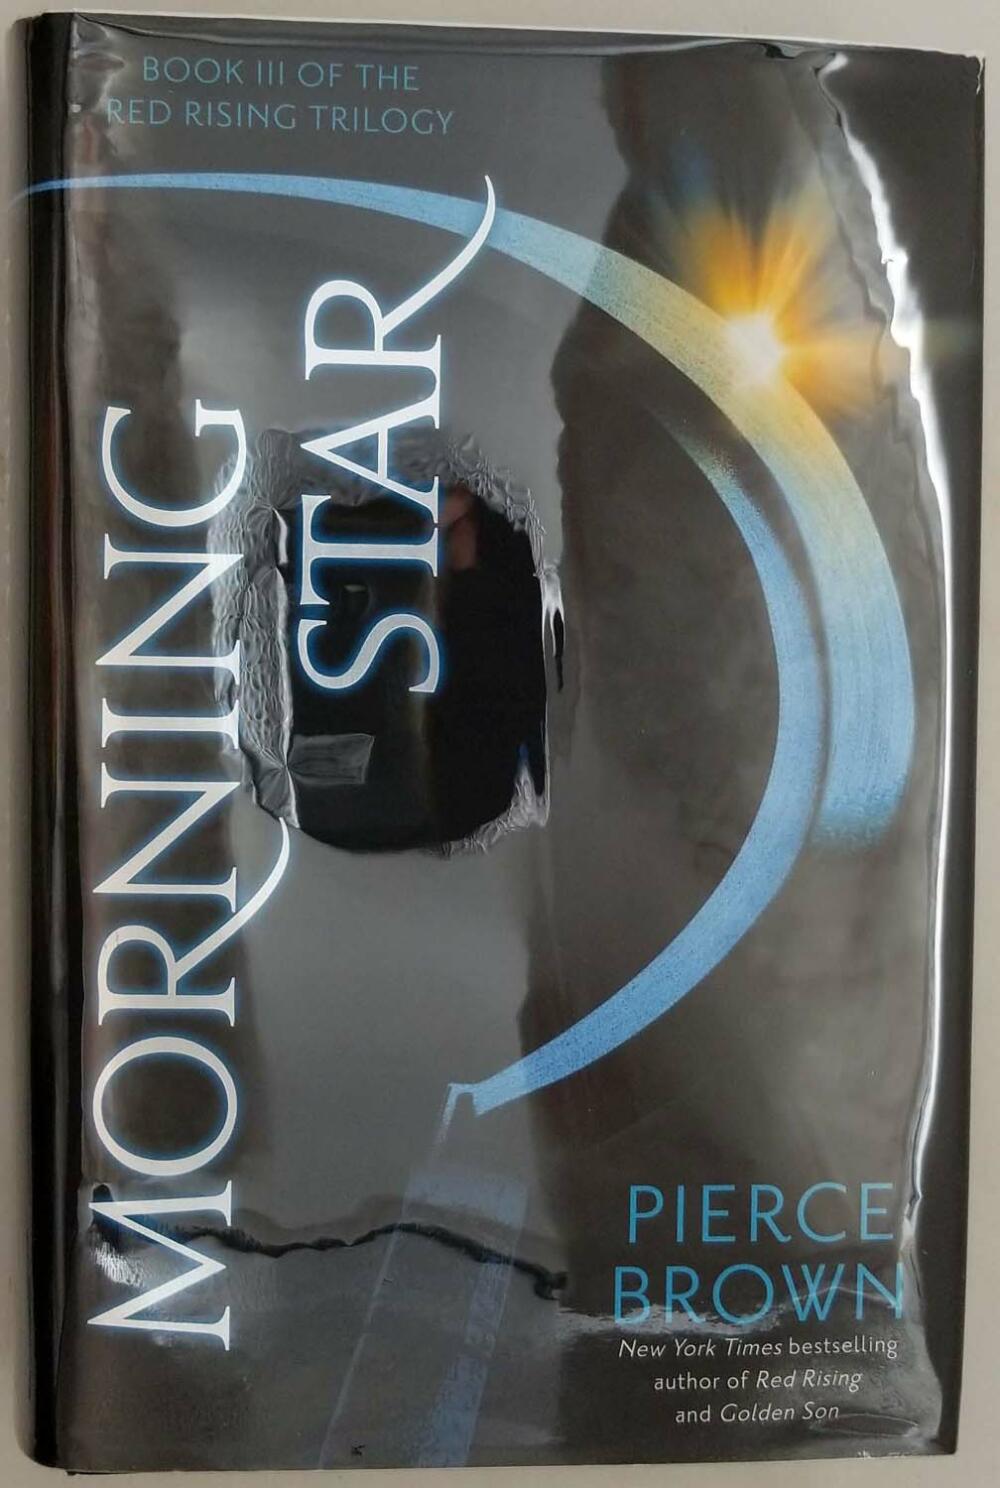 Morning Star - Pierce Brown 2016 | 1st Edition SIGNED